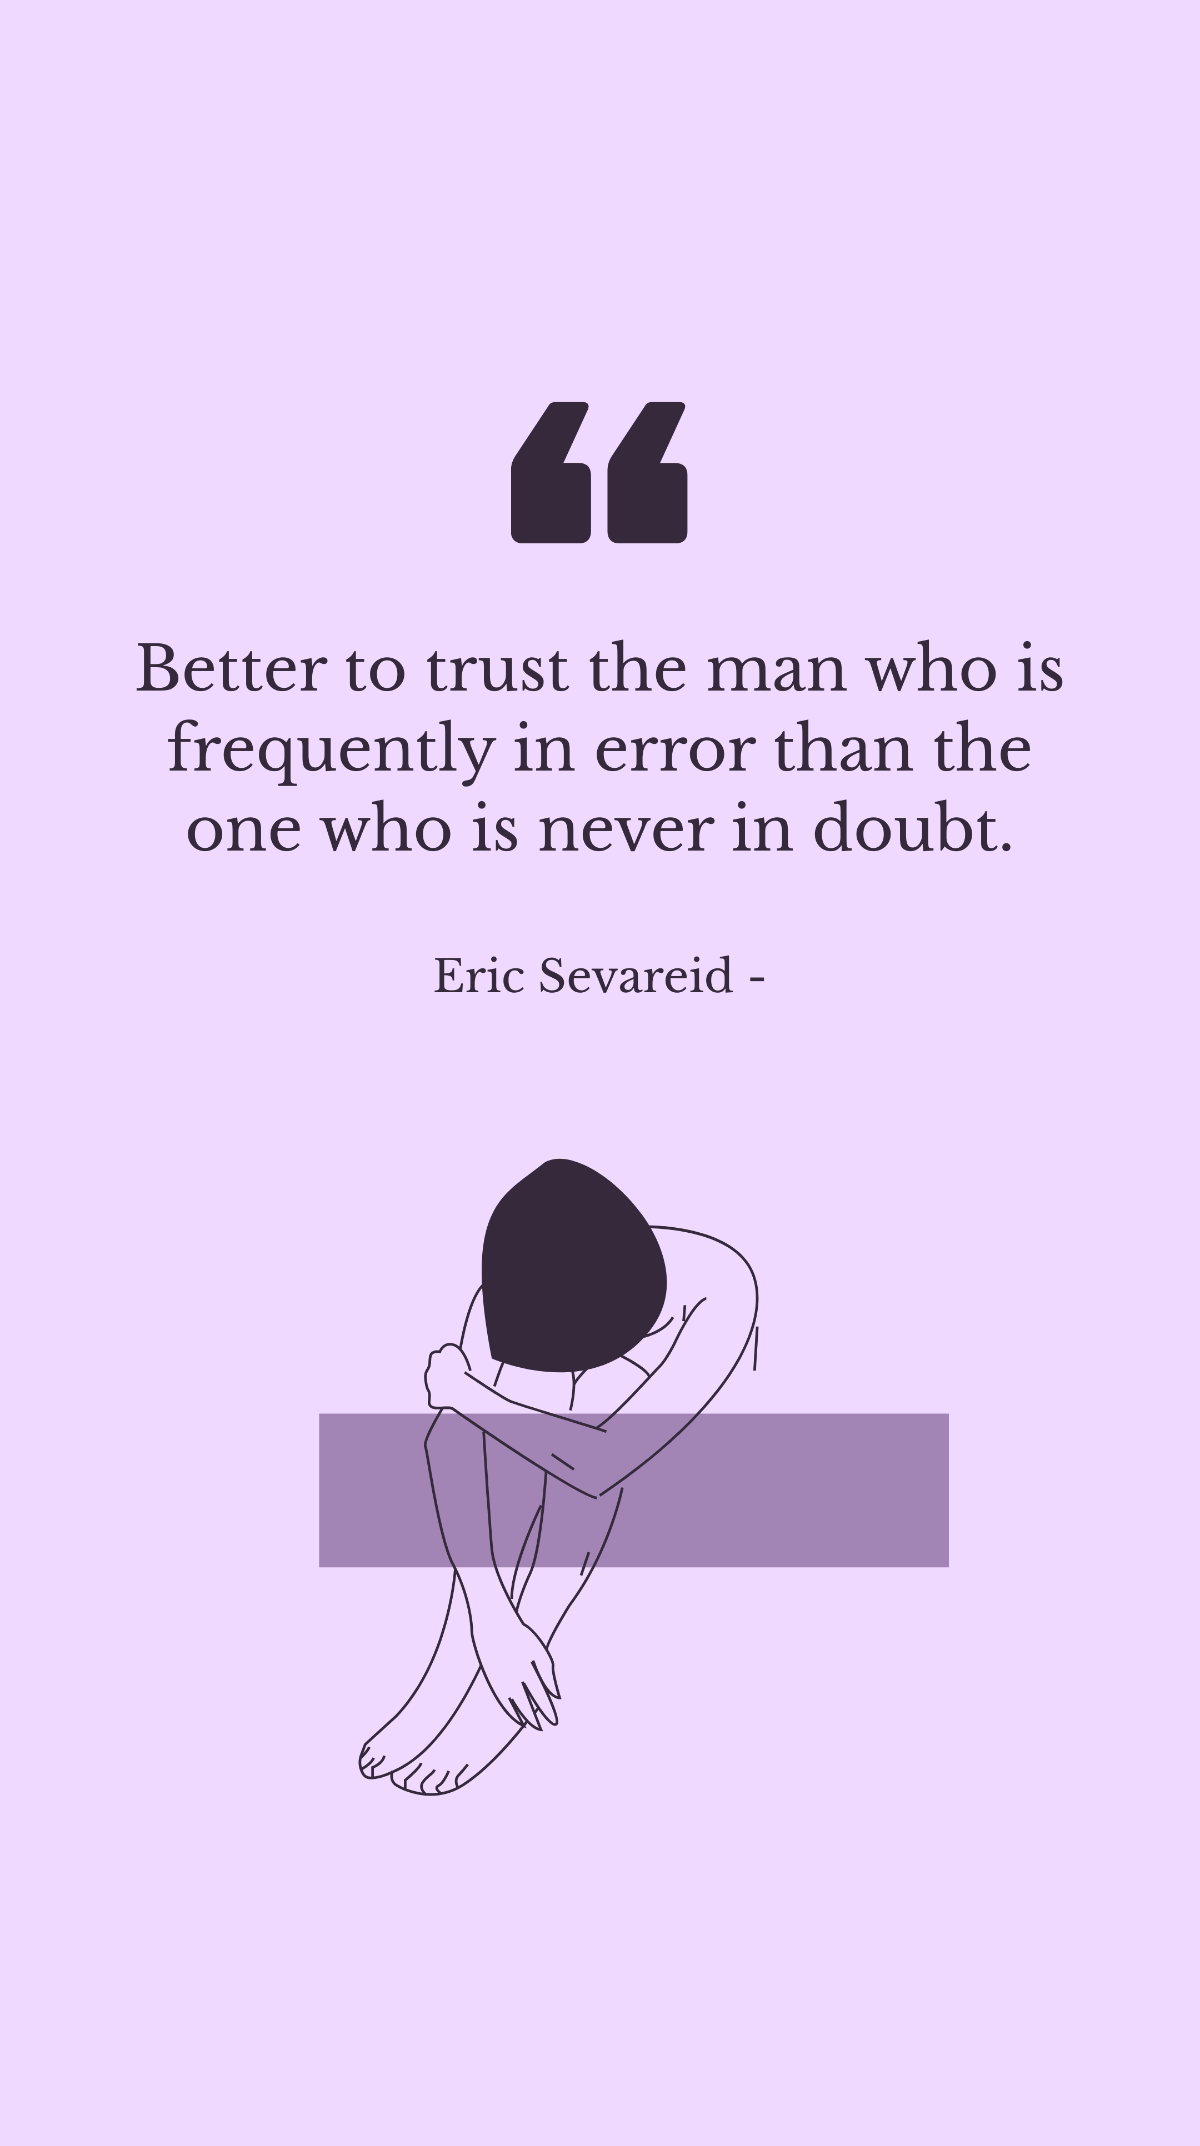 Free Eric Sevareid - Better to trust the man who is frequently in error than the one who is never in doubt. Template